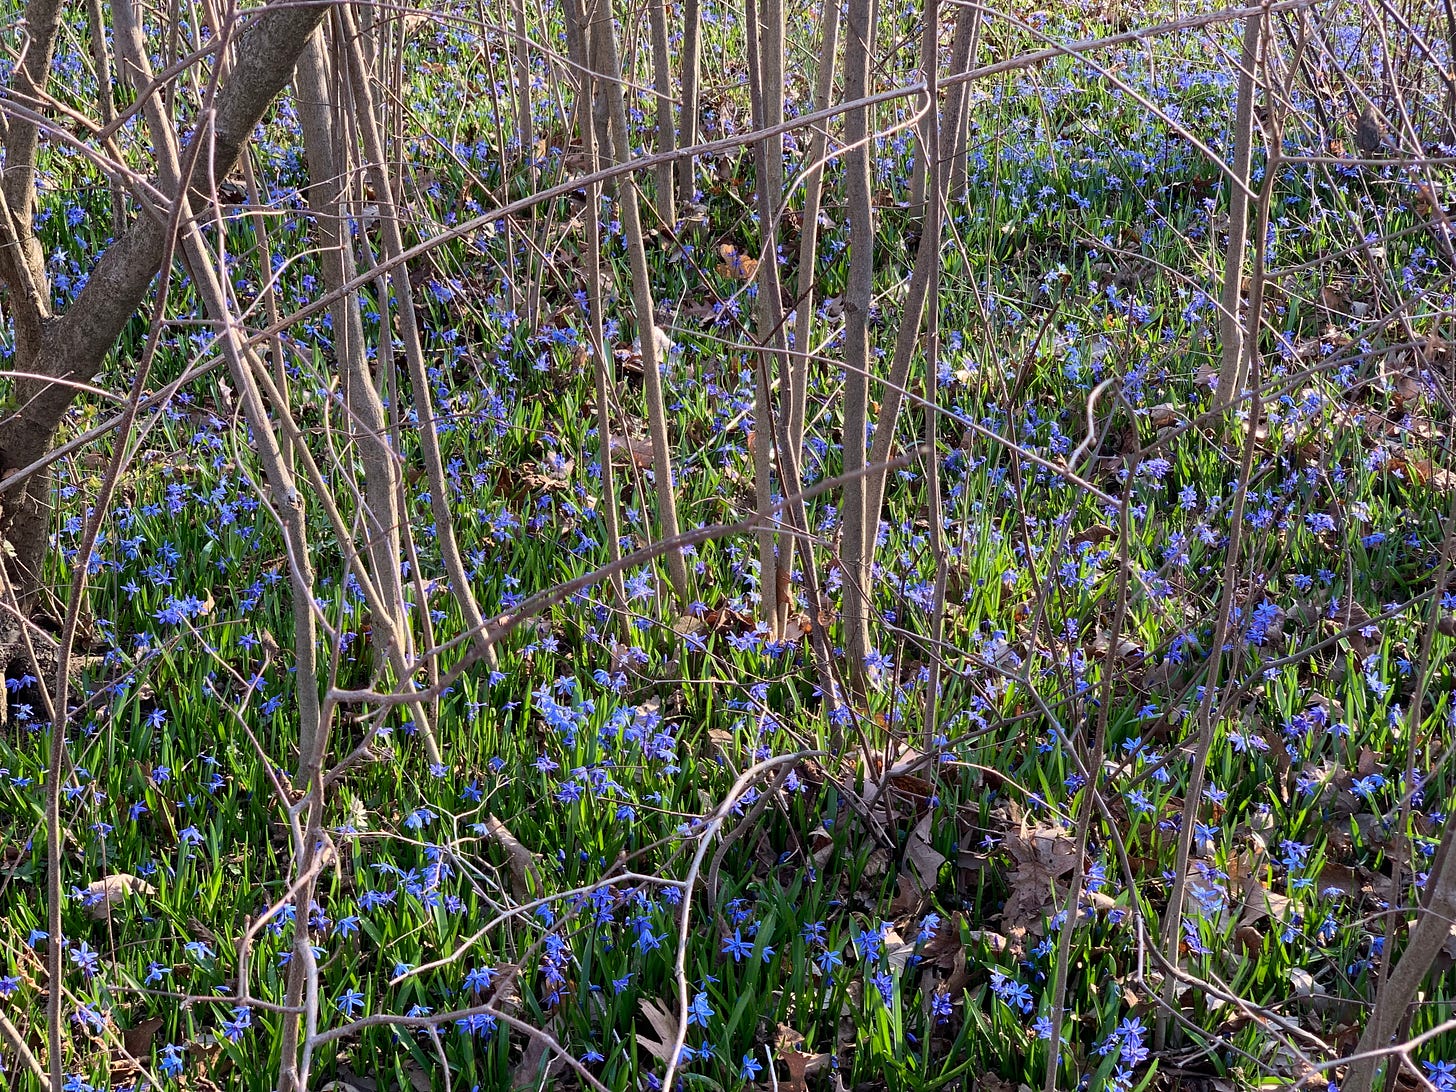 Small trees and branches grow upwards through a carpet of small blue flowers and green leaves